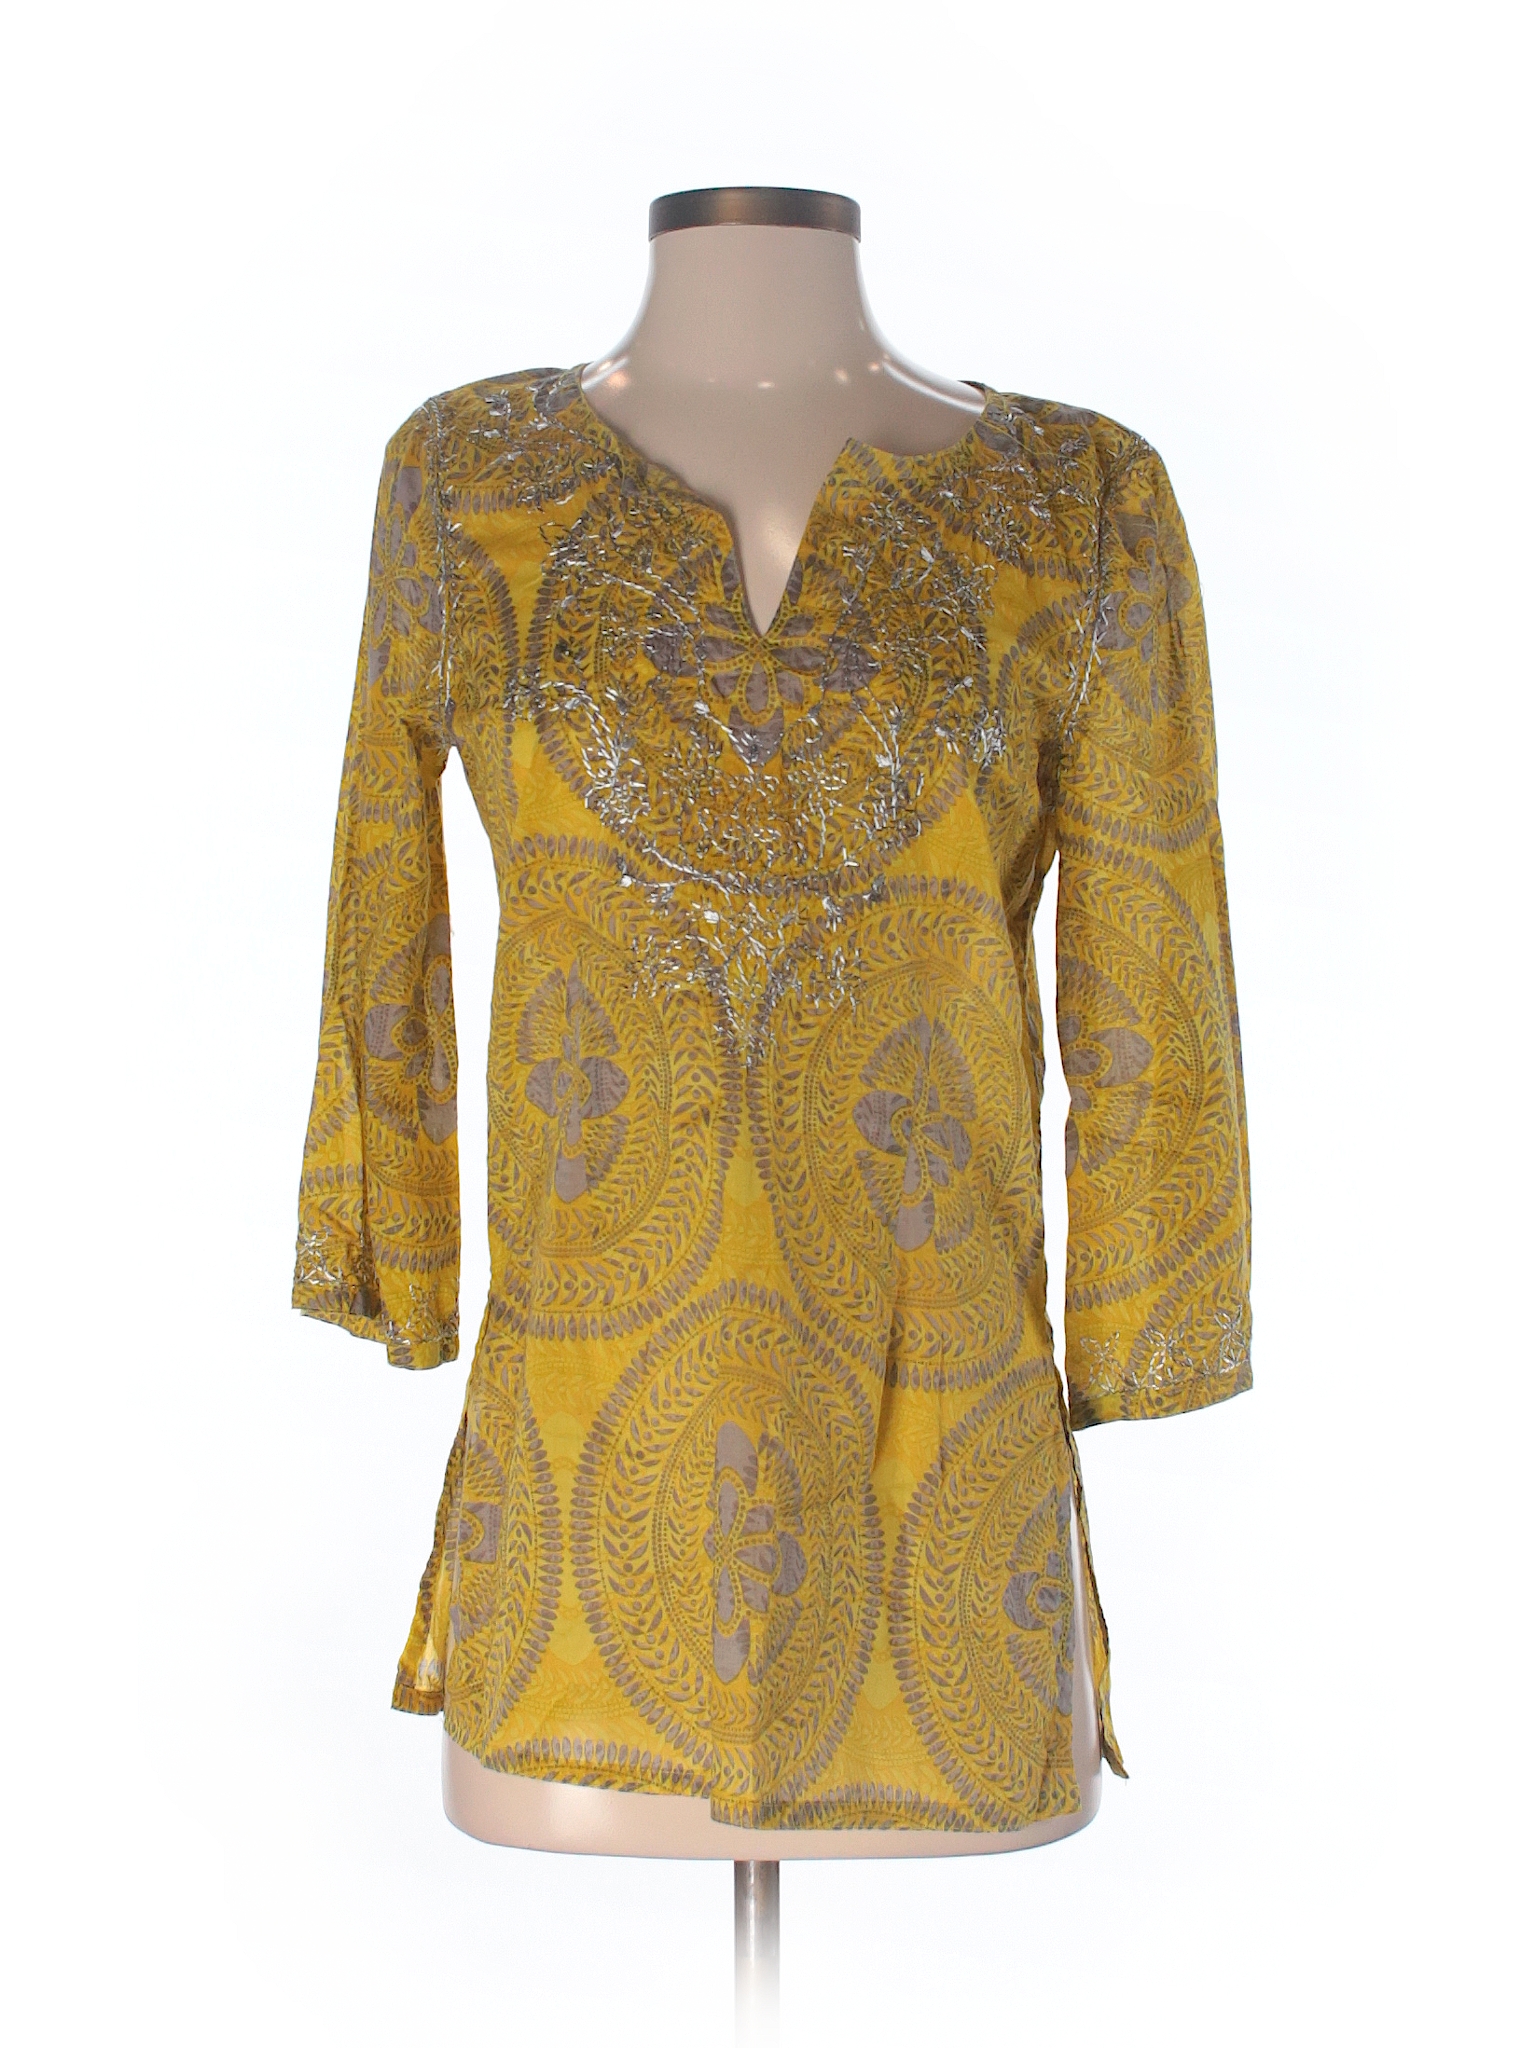 Inc International Concepts 3/4 Sleeve Blouse - 71% off only on thredUP